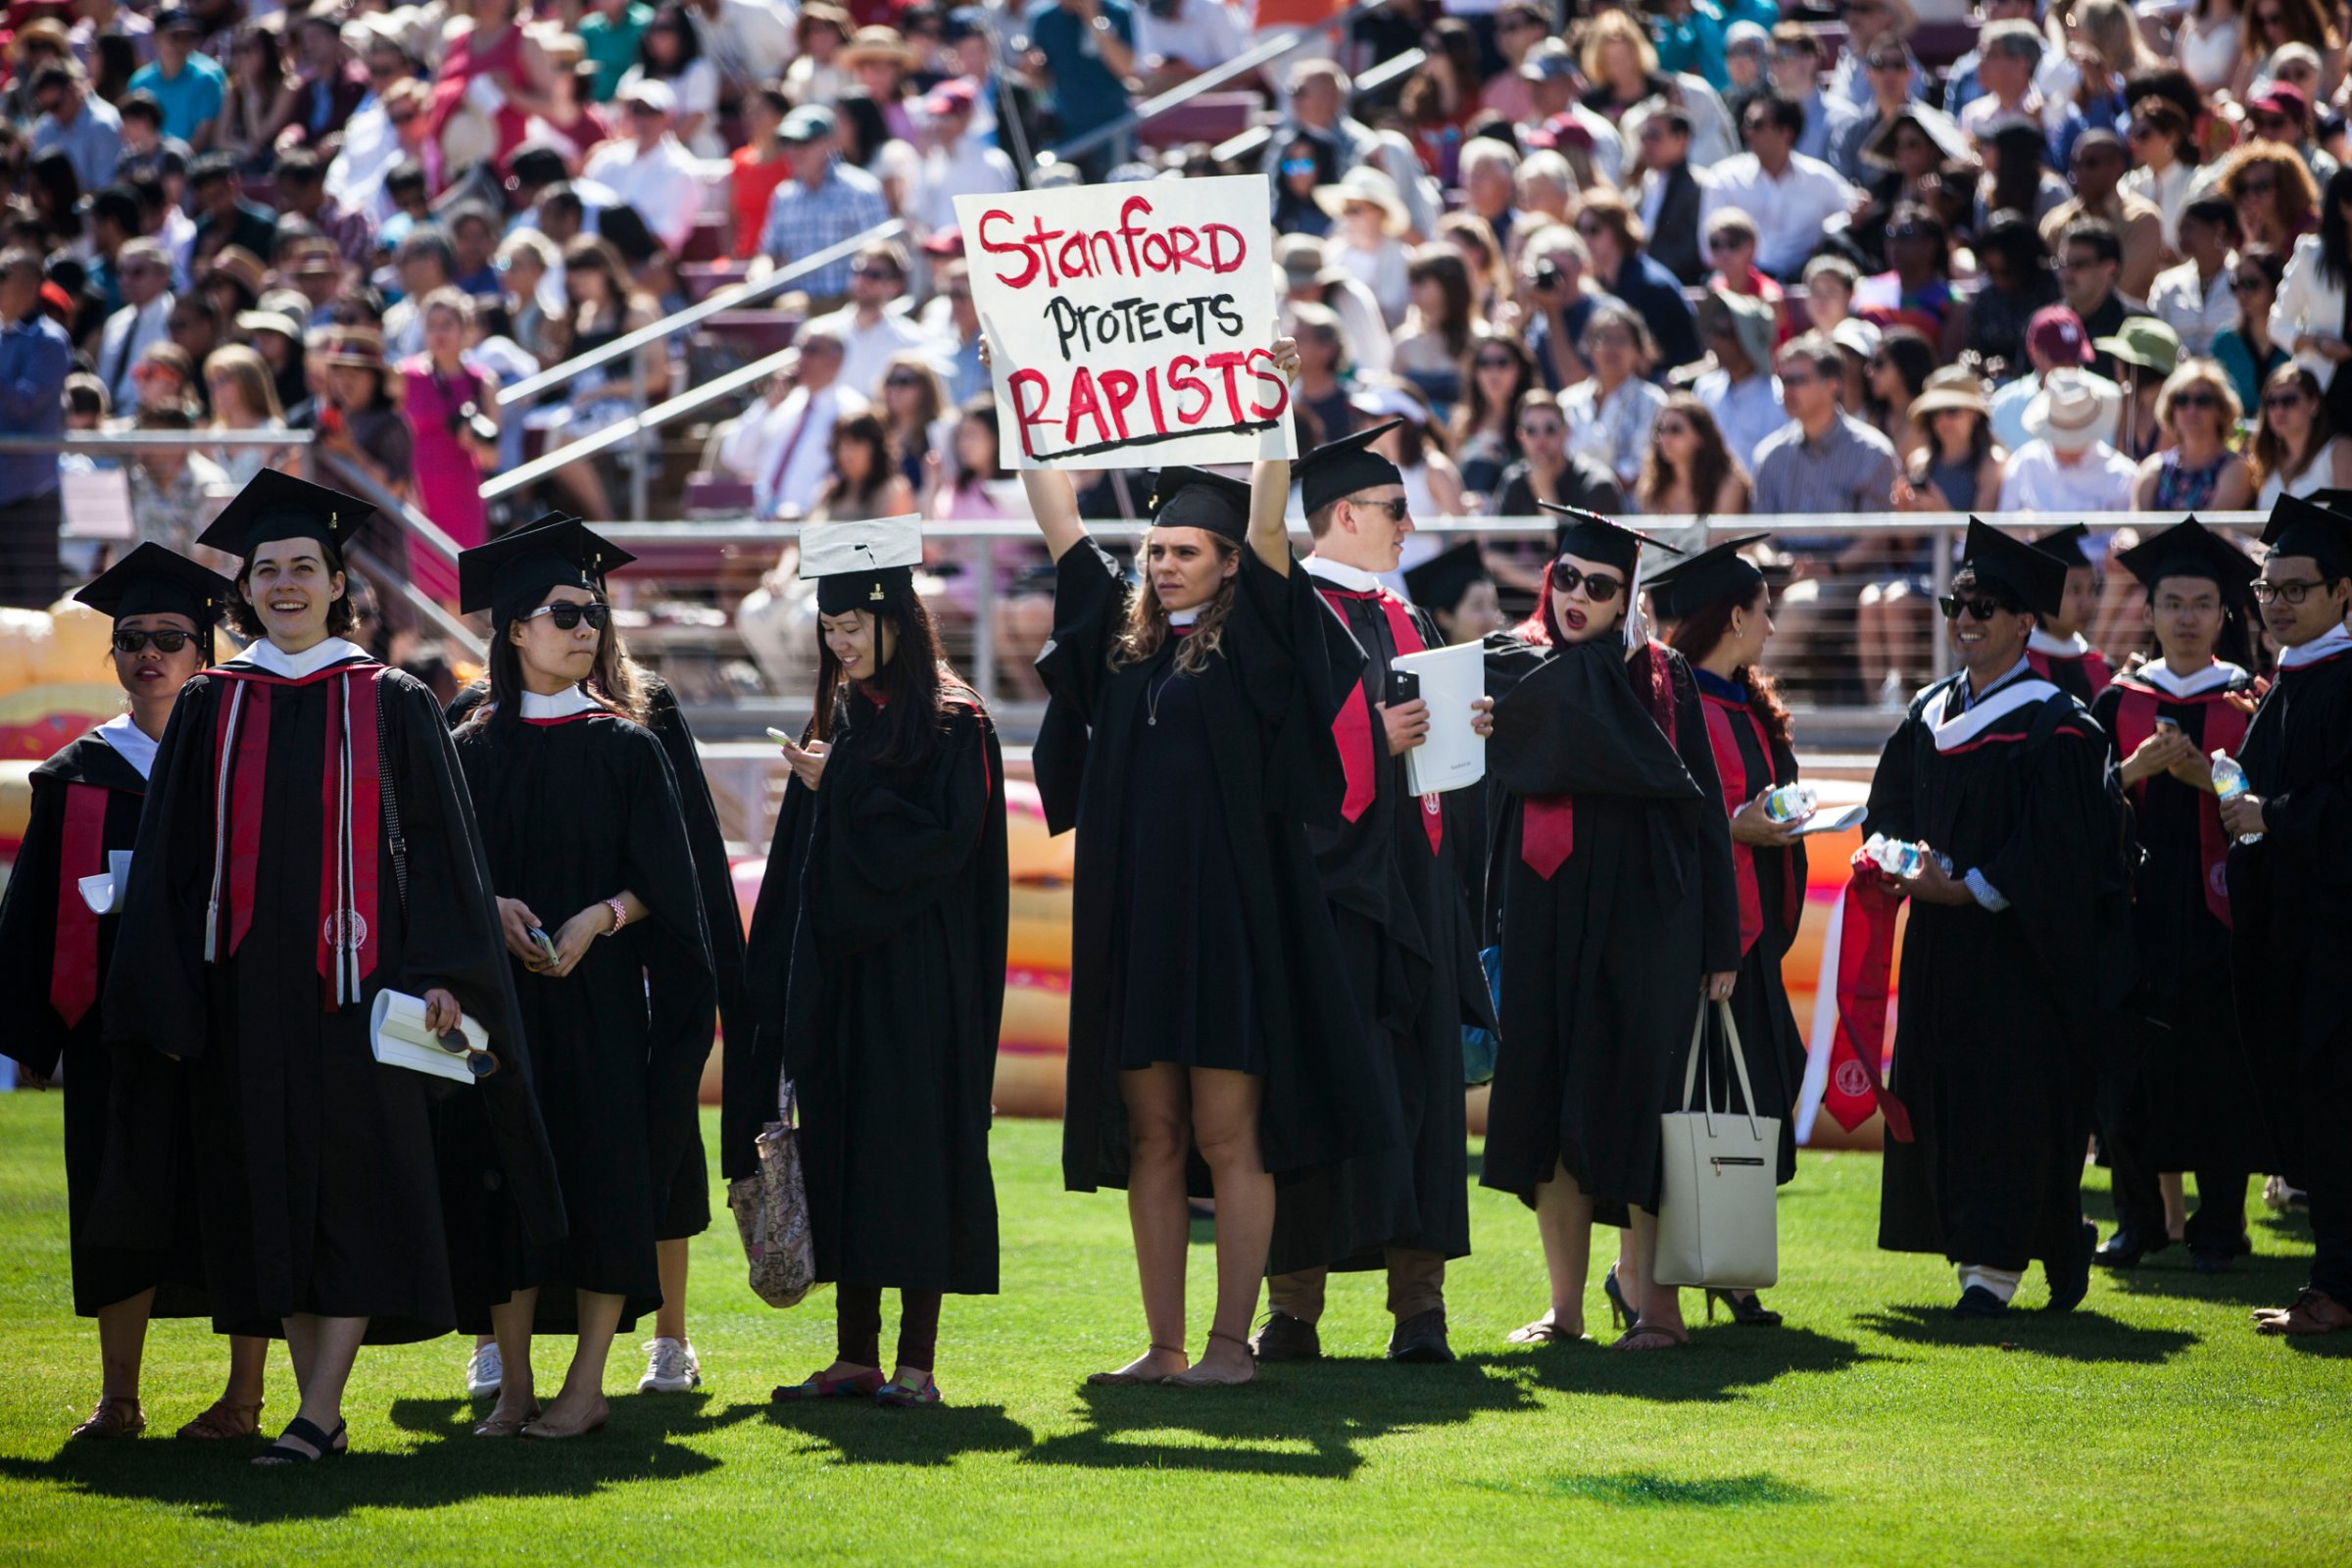 Graduating student, Andrea Lorei, who help organize campus demonstrations holds a sign in protest during the 'Wacky Walk' before the 125th Stanford University commencement ceremony in Stanford, Calif. on June 12, 2016.